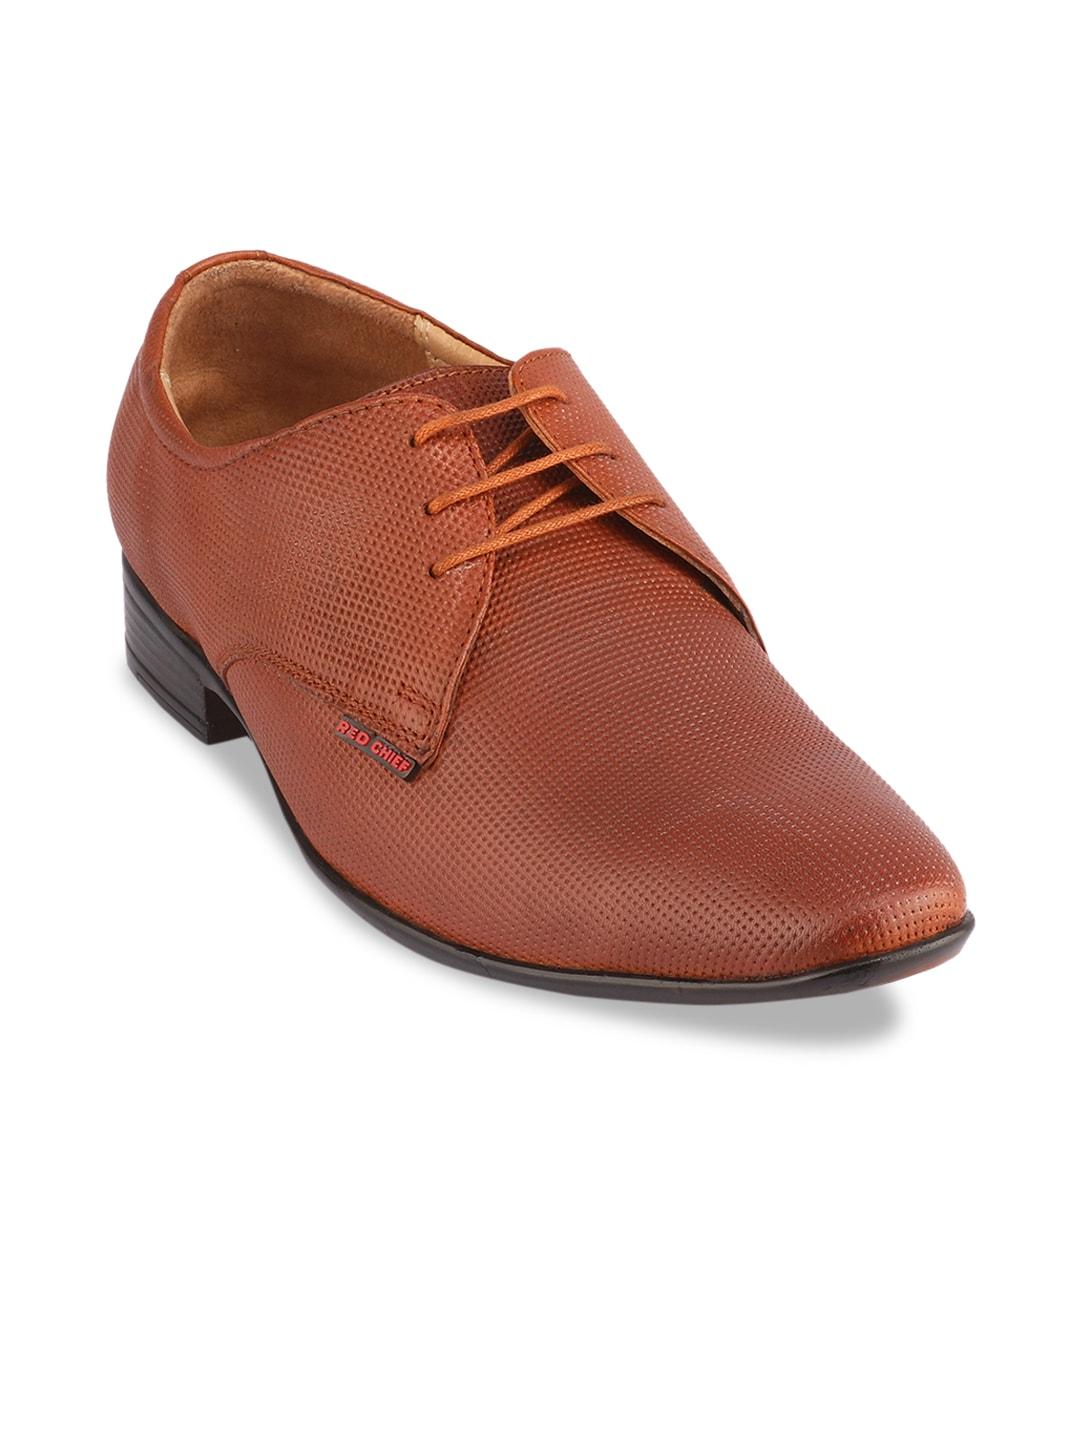 Red Chief Men Tan Textured Leather Formal Derbys